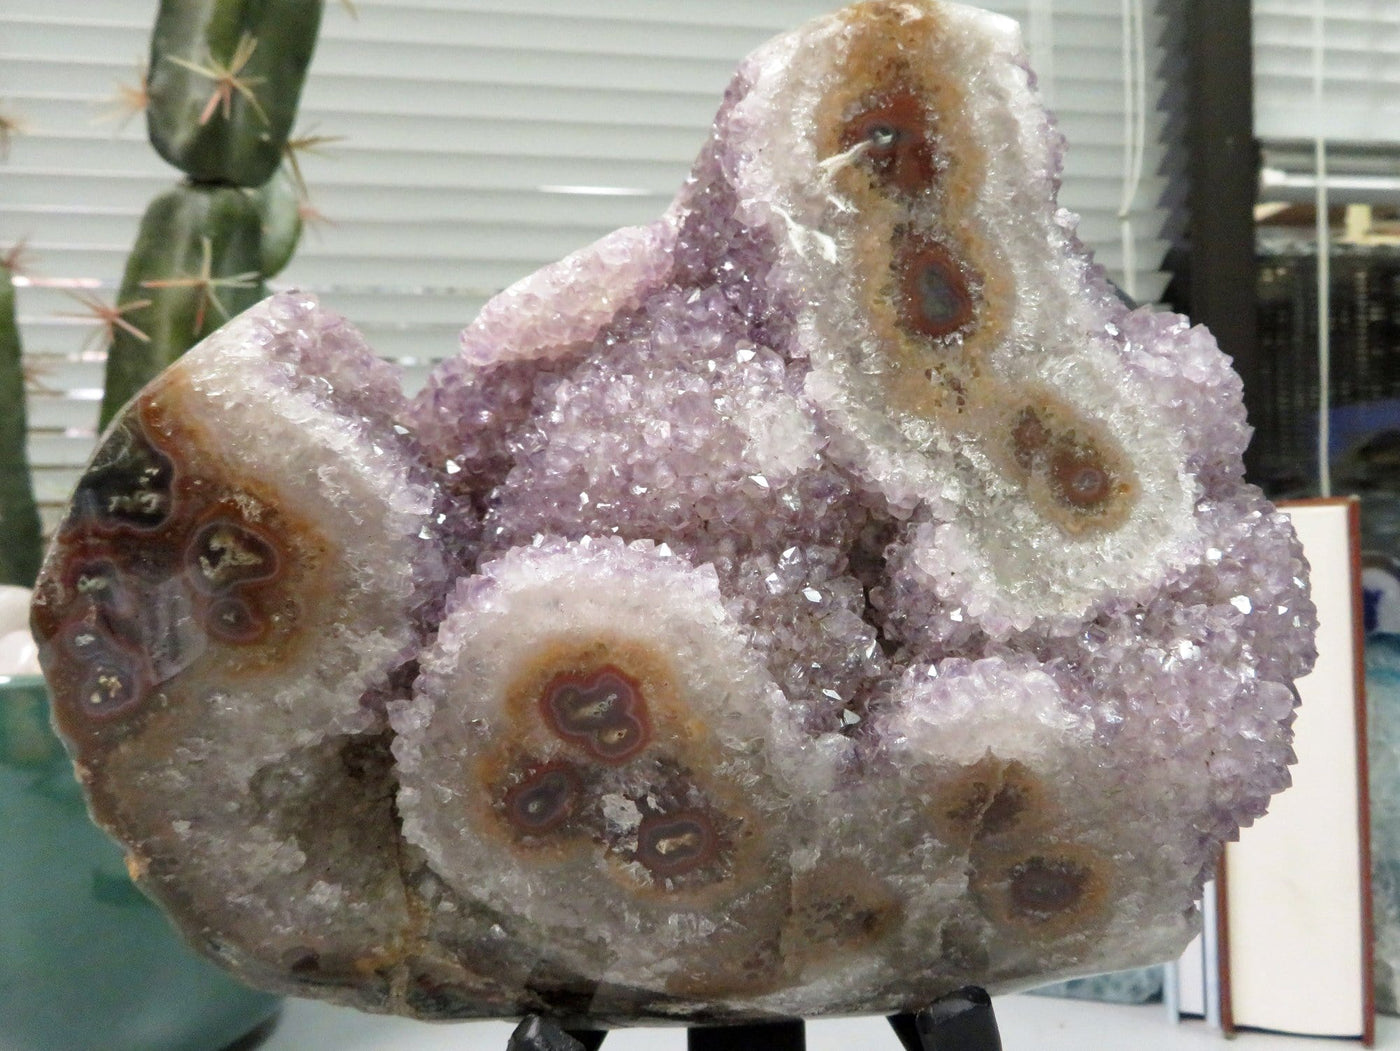 up close shot of amethyst formation with stalactites on metal stand